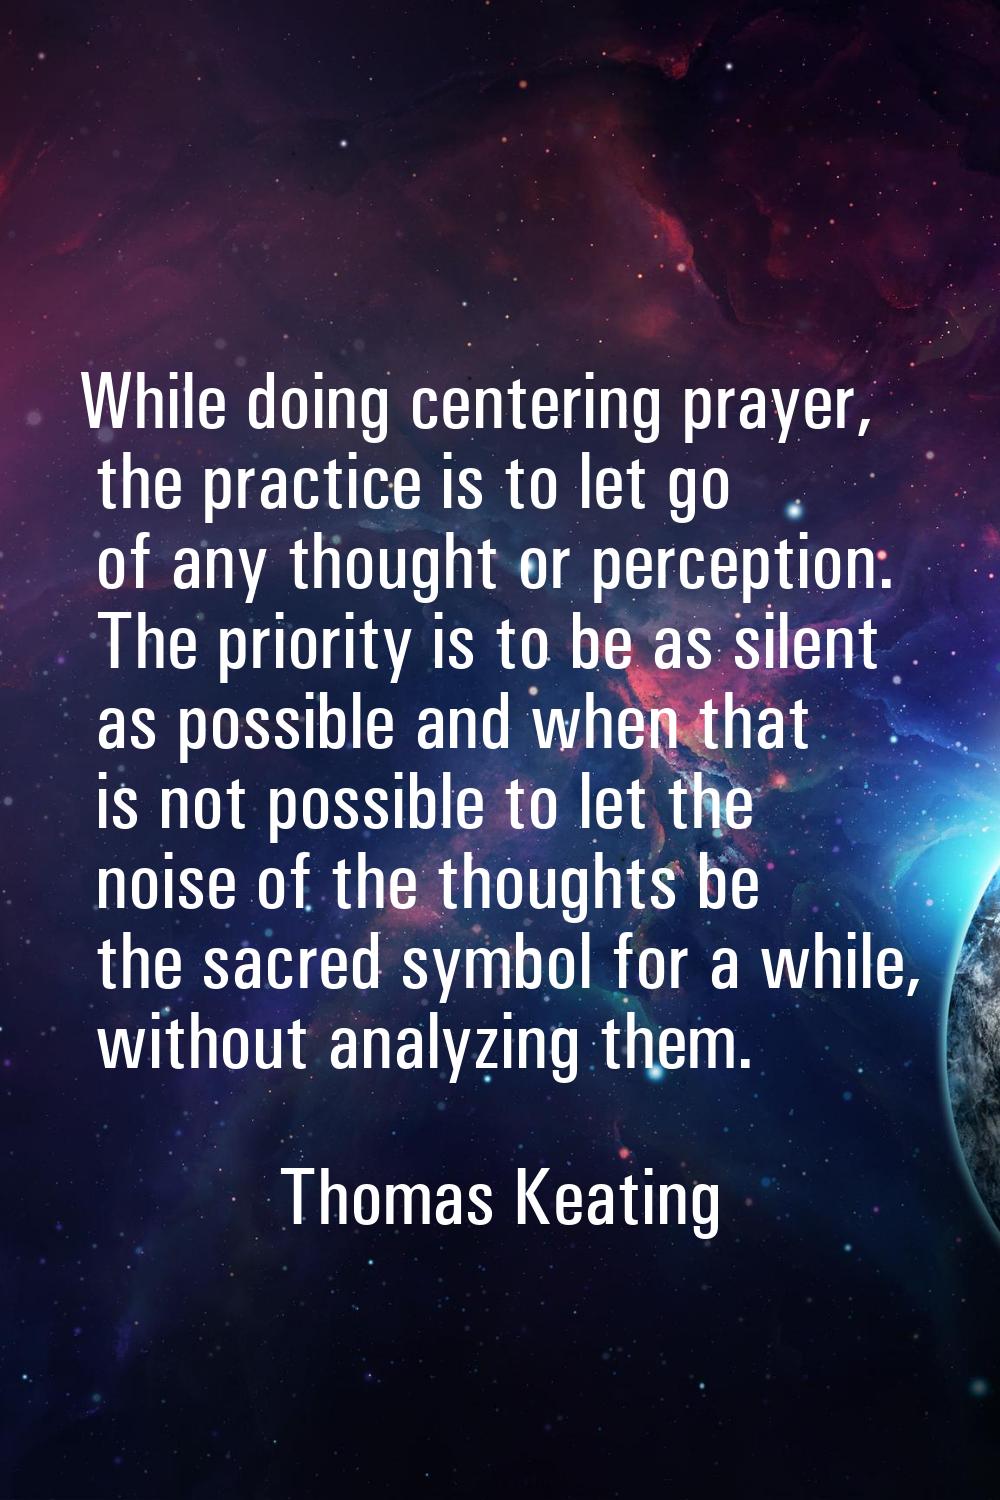 While doing centering prayer, the practice is to let go of any thought or perception. The priority 